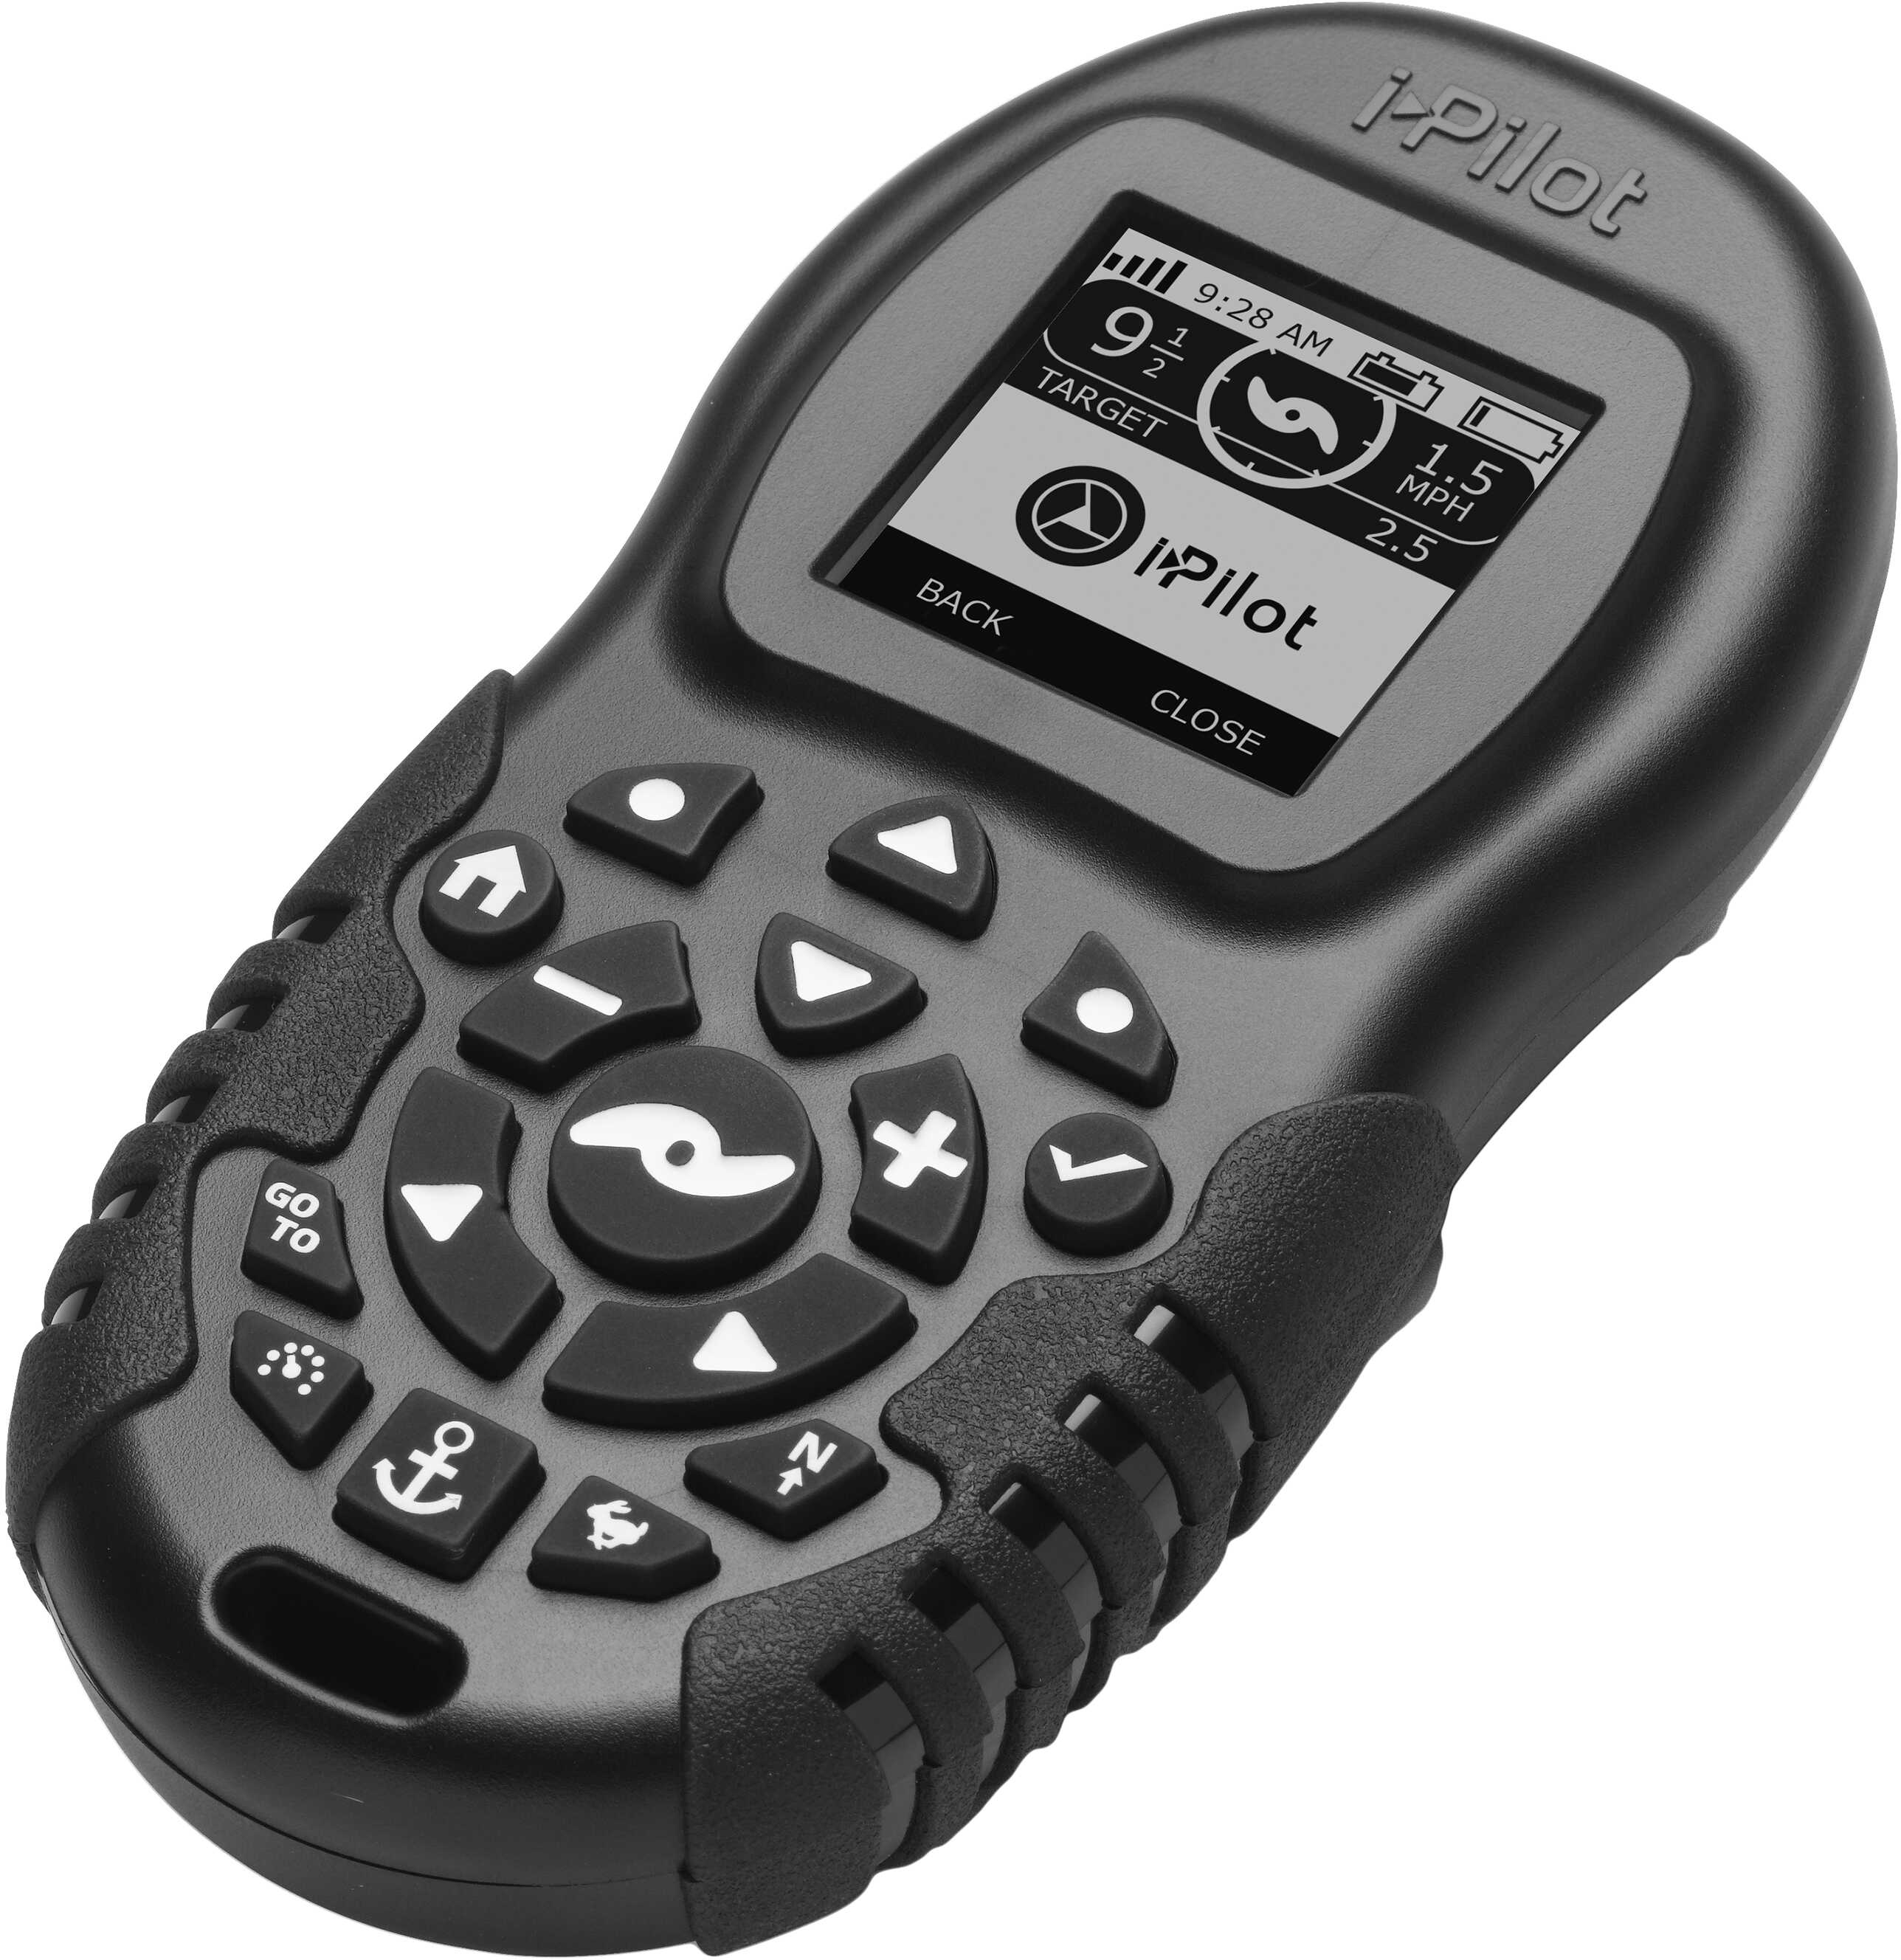 Minn Kota i-Pilot Replacement Remote with Bluetooth Md: 1866550